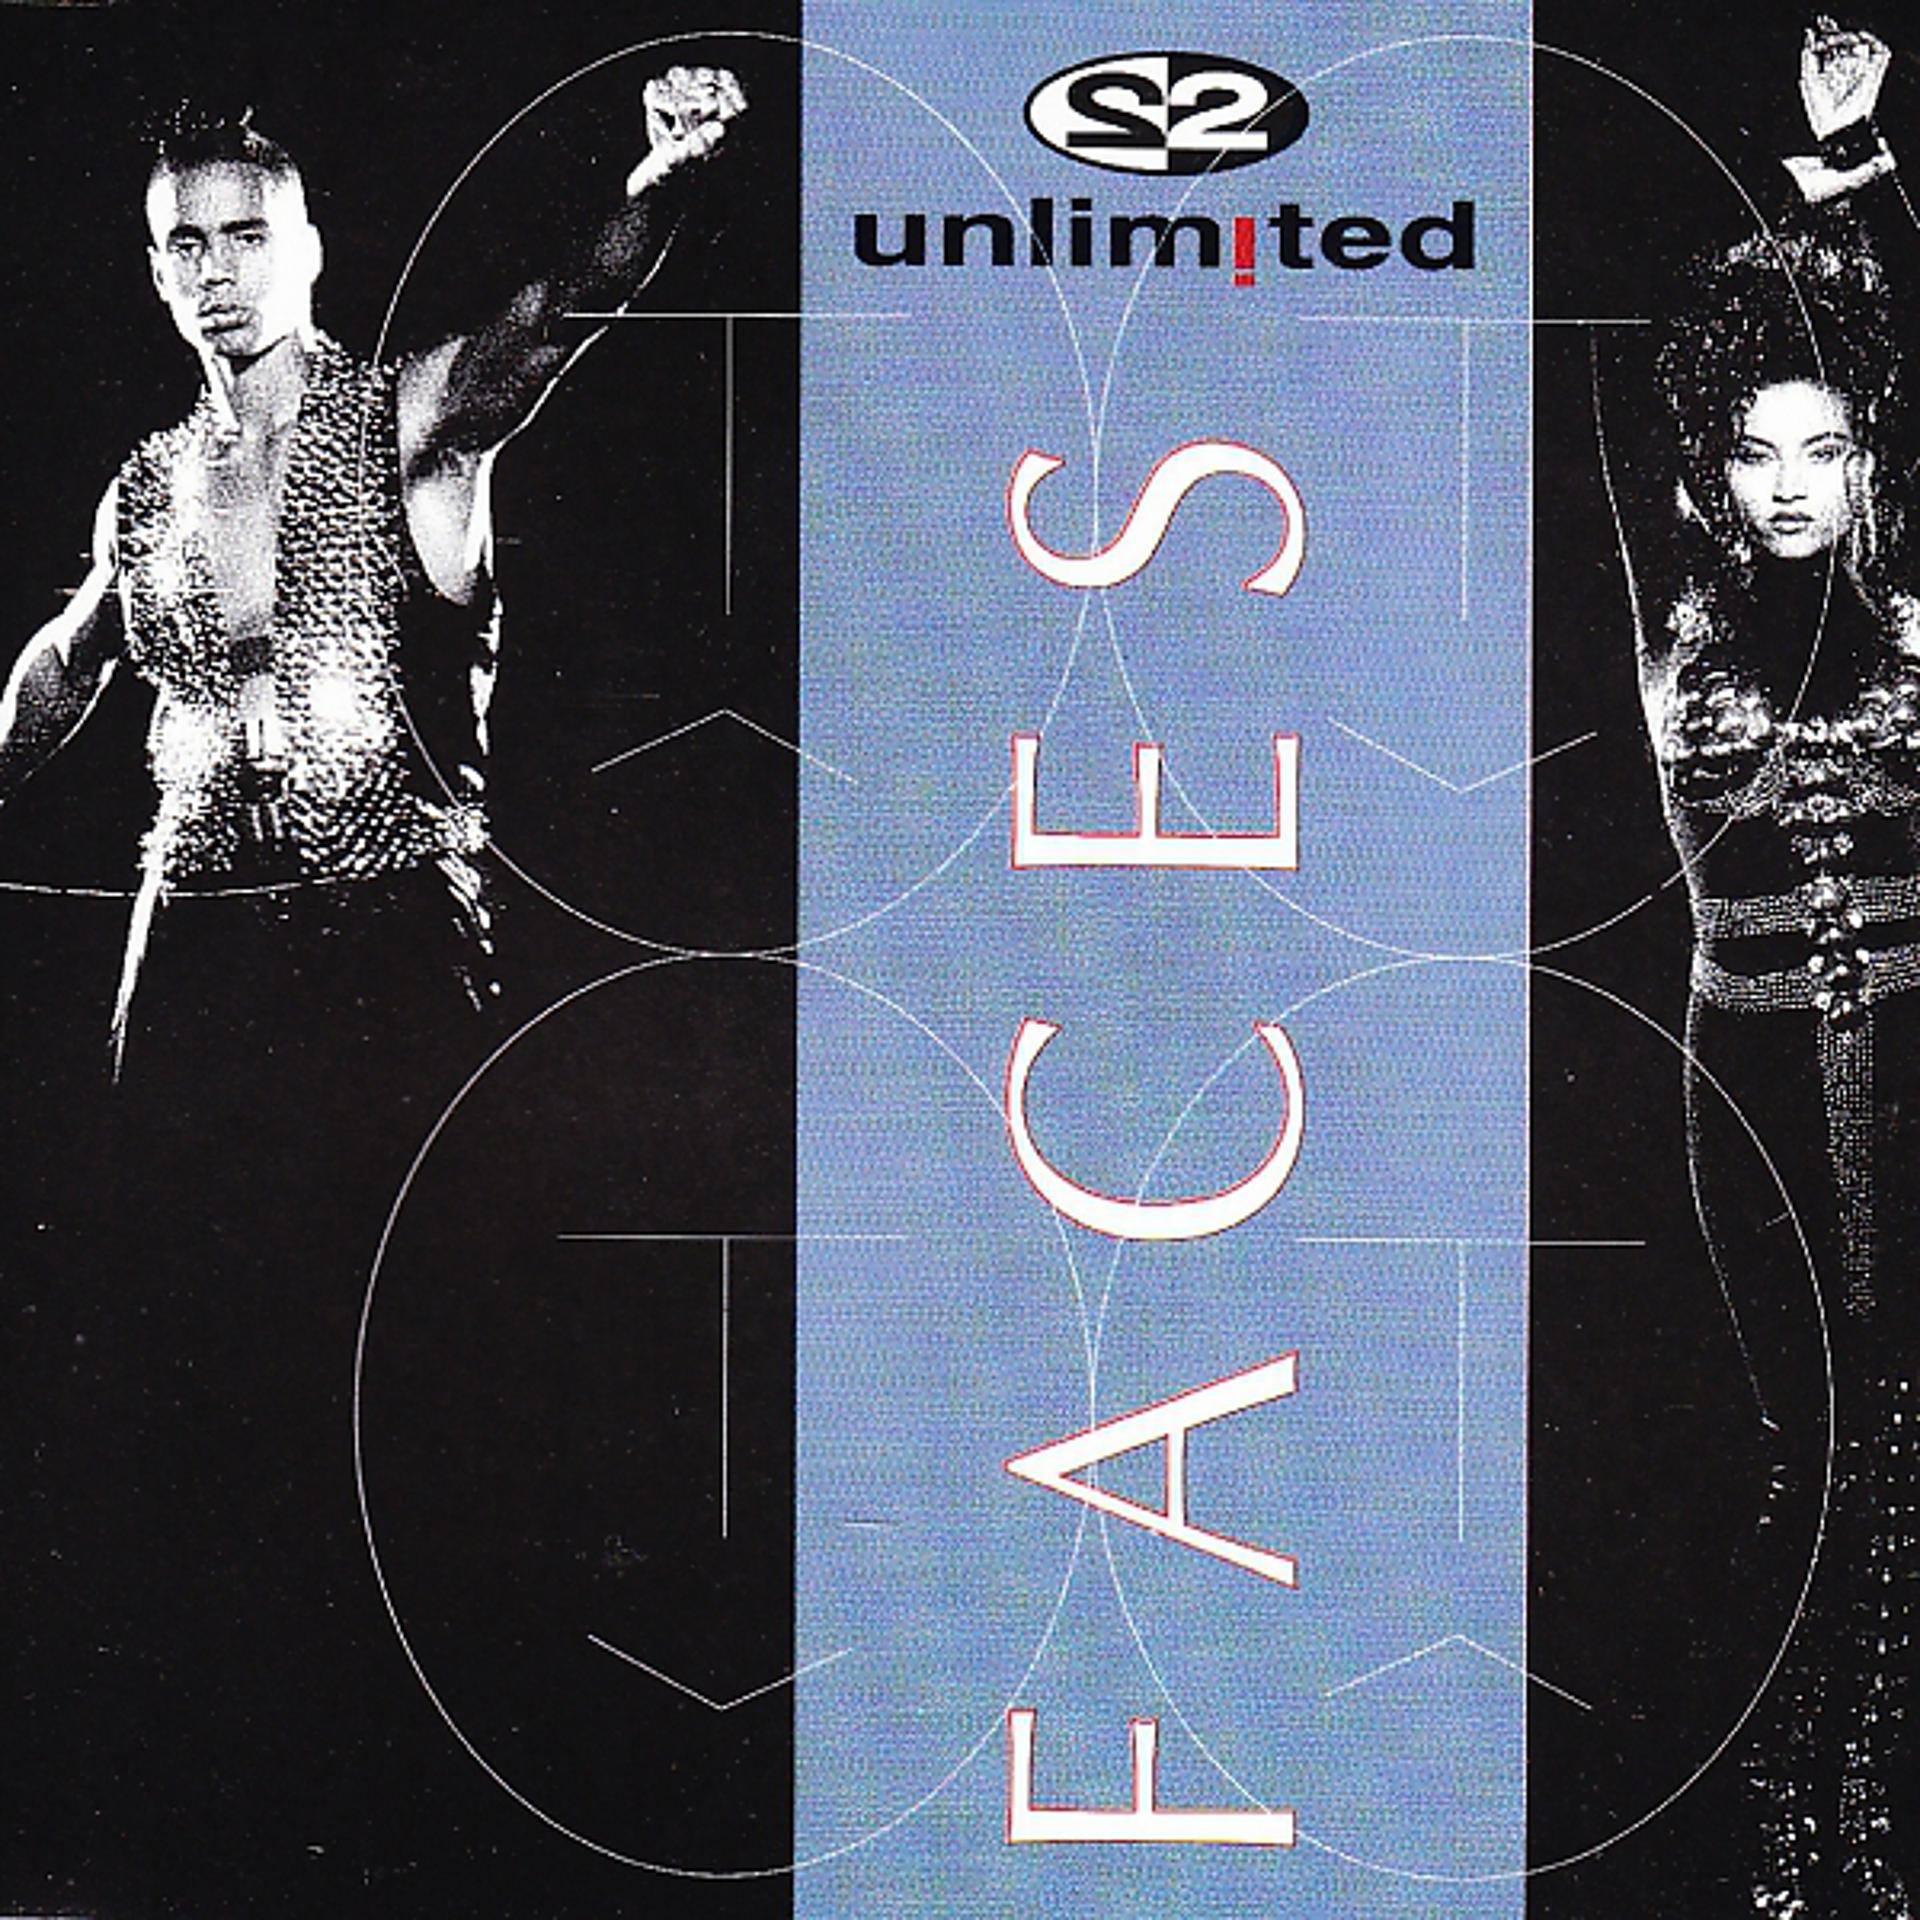 Unlimited faces. 2 Unlimited Anita. 2 Unlimited CD. 2 Unlimited faces. 2 Unlimited альбомы.